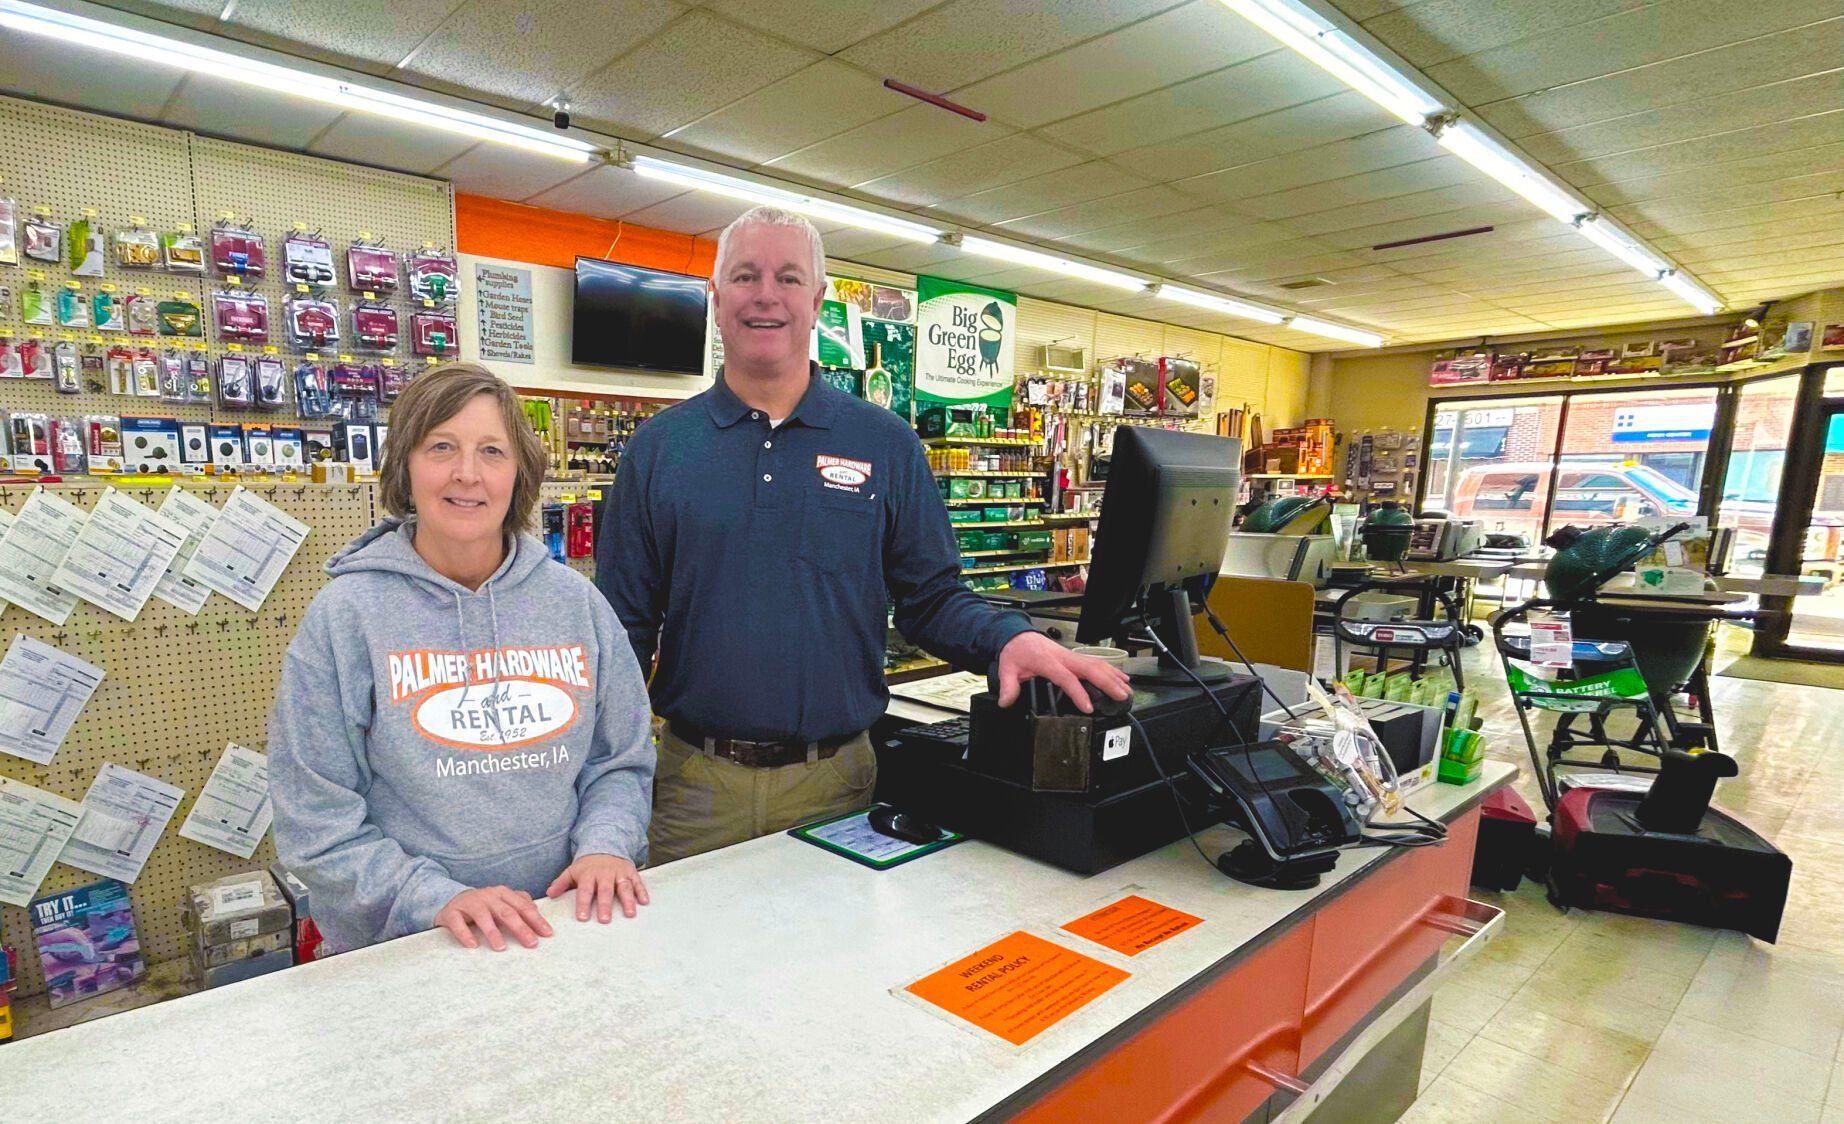 Owners Anita and Steve Palmer stand at the front register of Palmer Hardware in Manchester, Iowa. The business has been in operation since 1952.    PHOTO CREDIT: Erik Hogstrom
Telegraph Herald